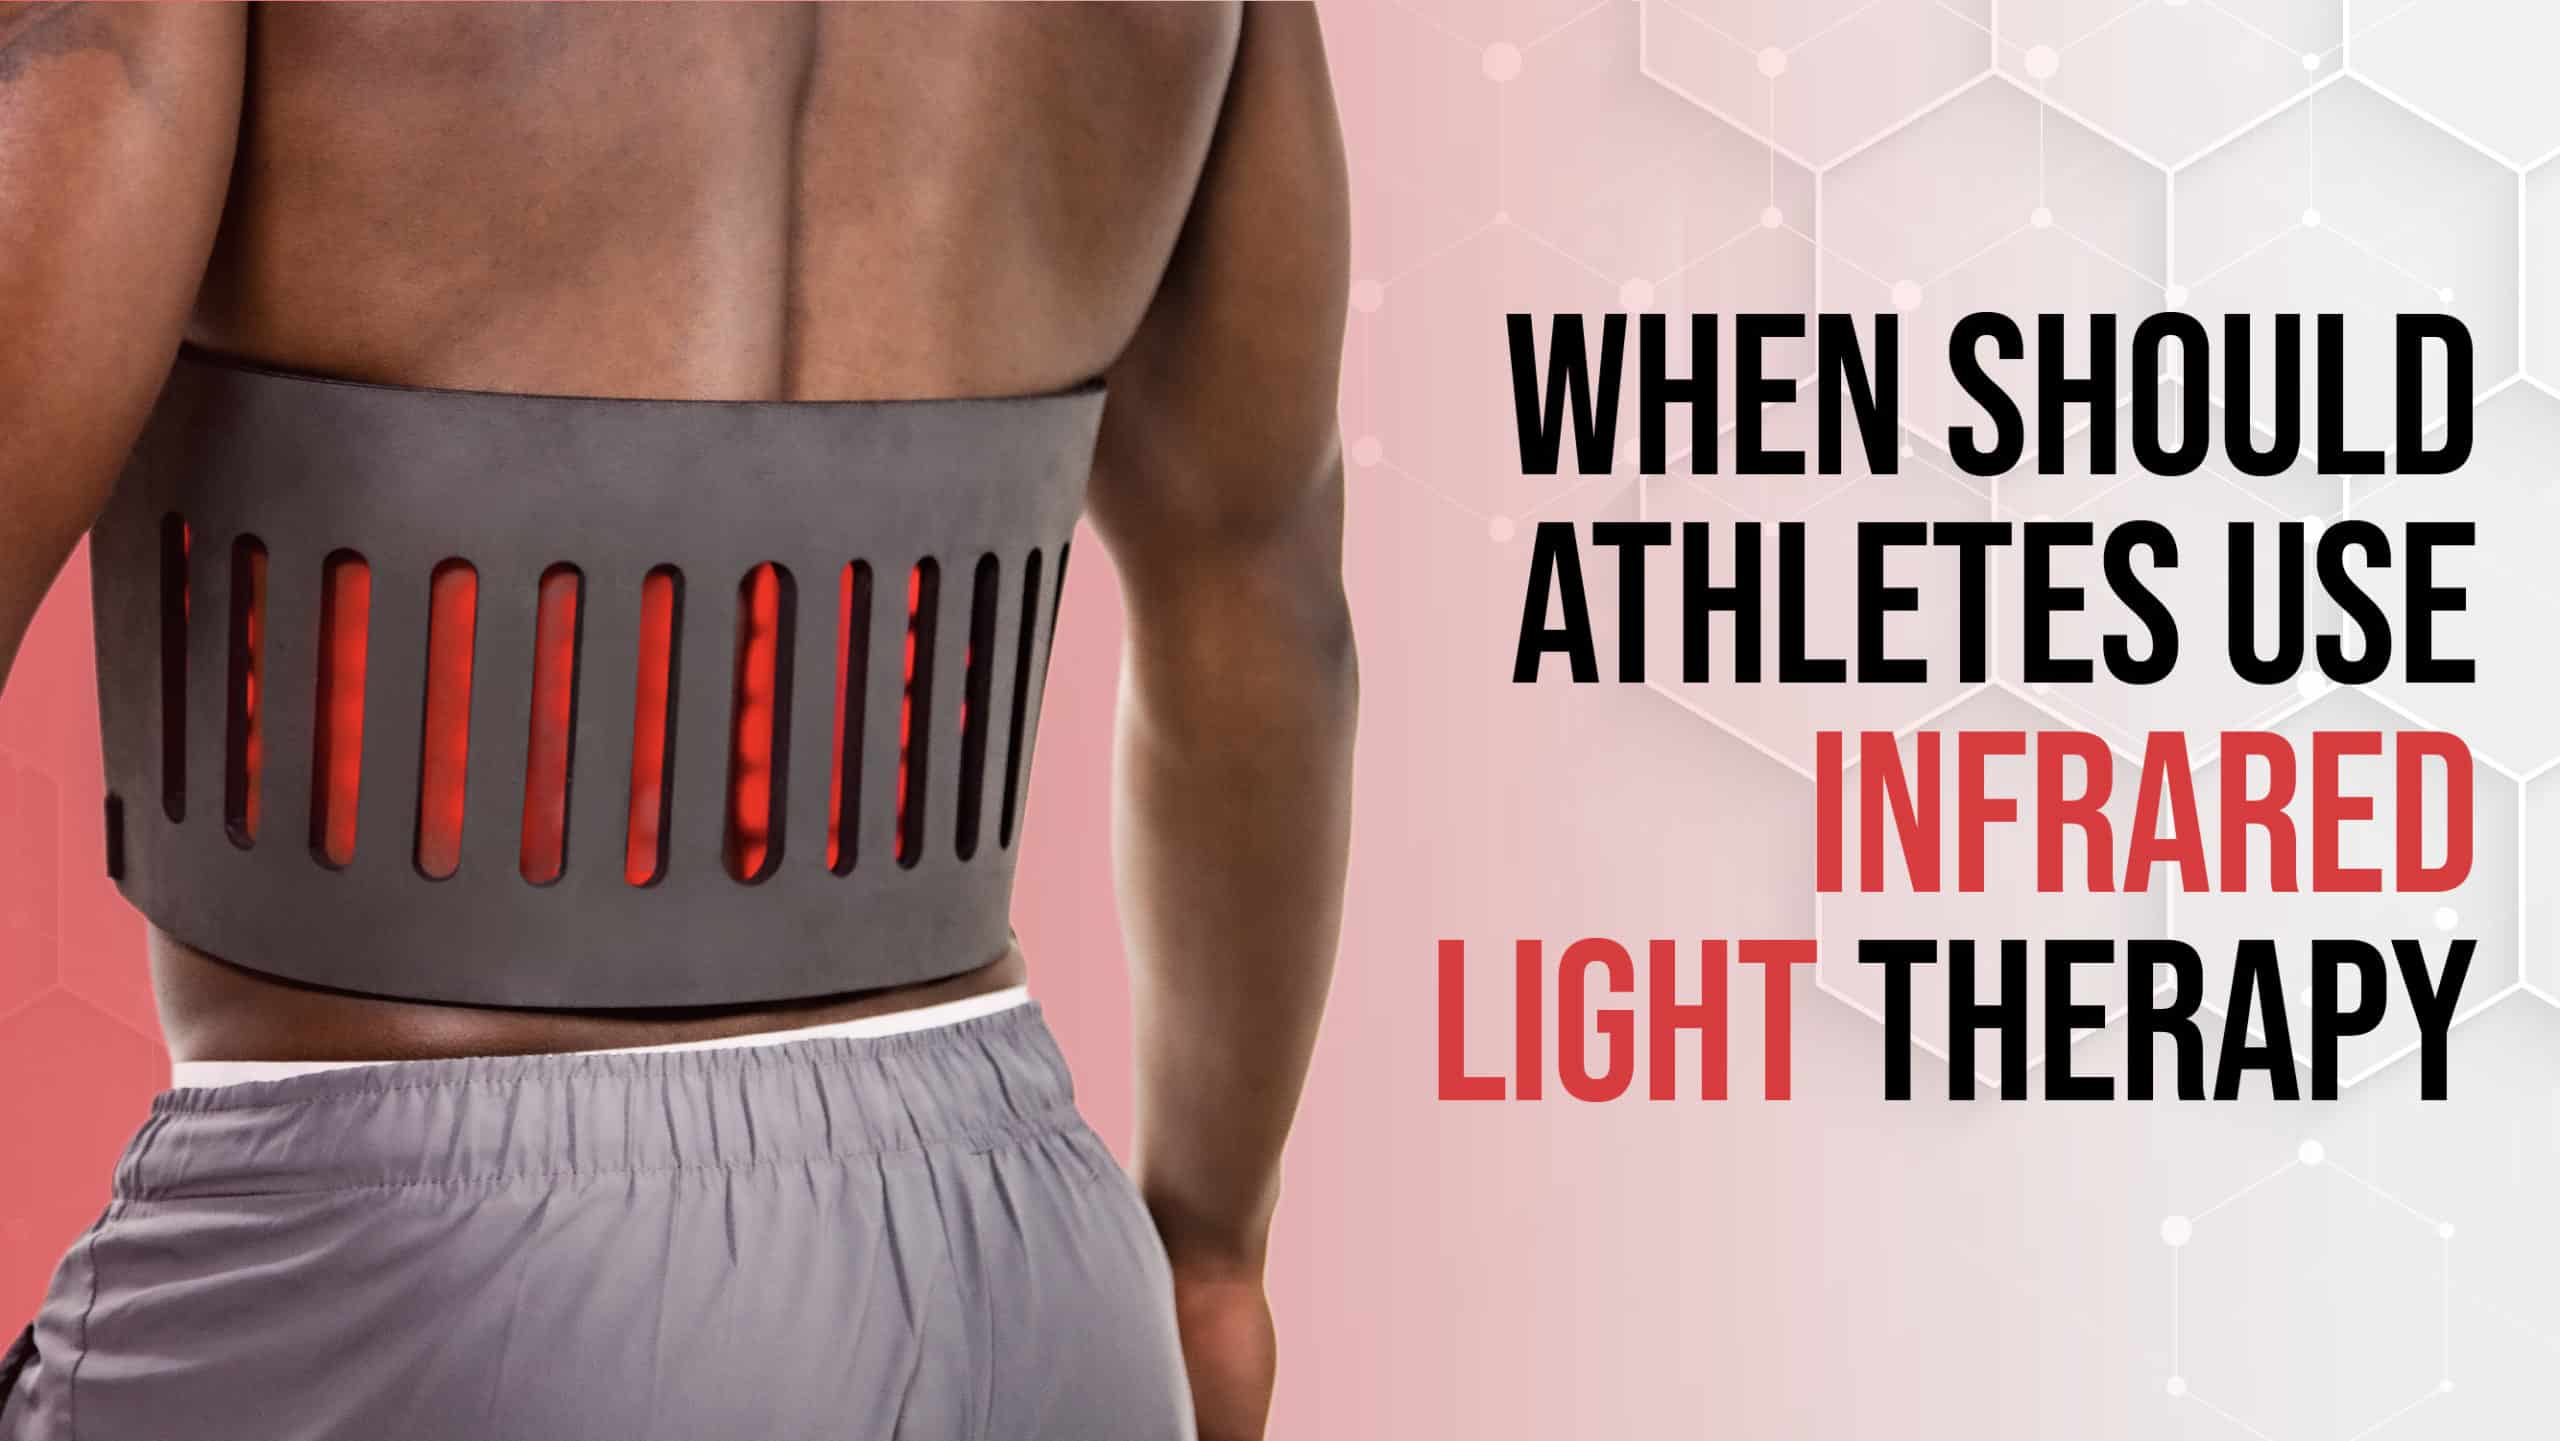 When Should Athletes Use Infrared Light Therapy?